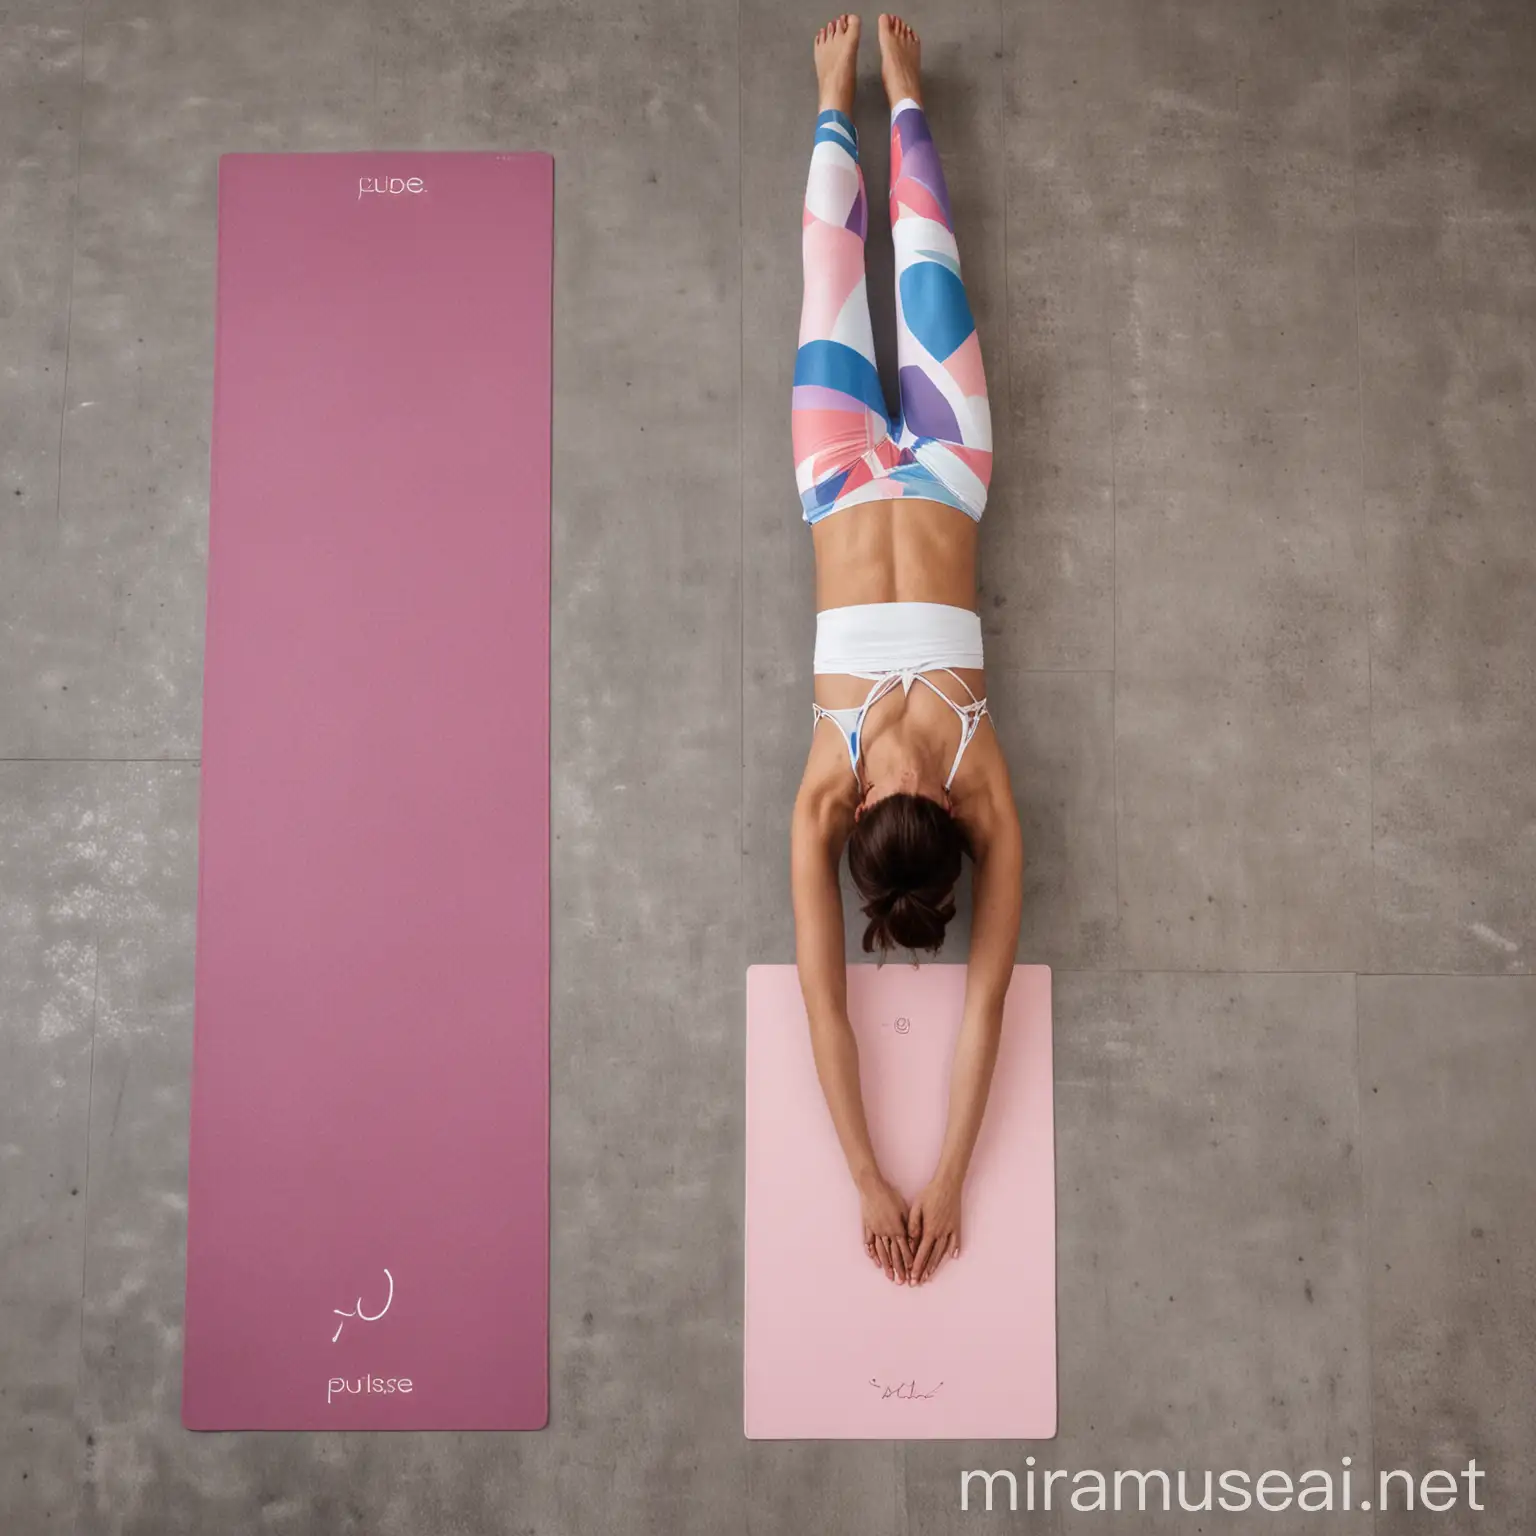 Minimalist and Colorful Girls Yoga Mats with Pulse Logo